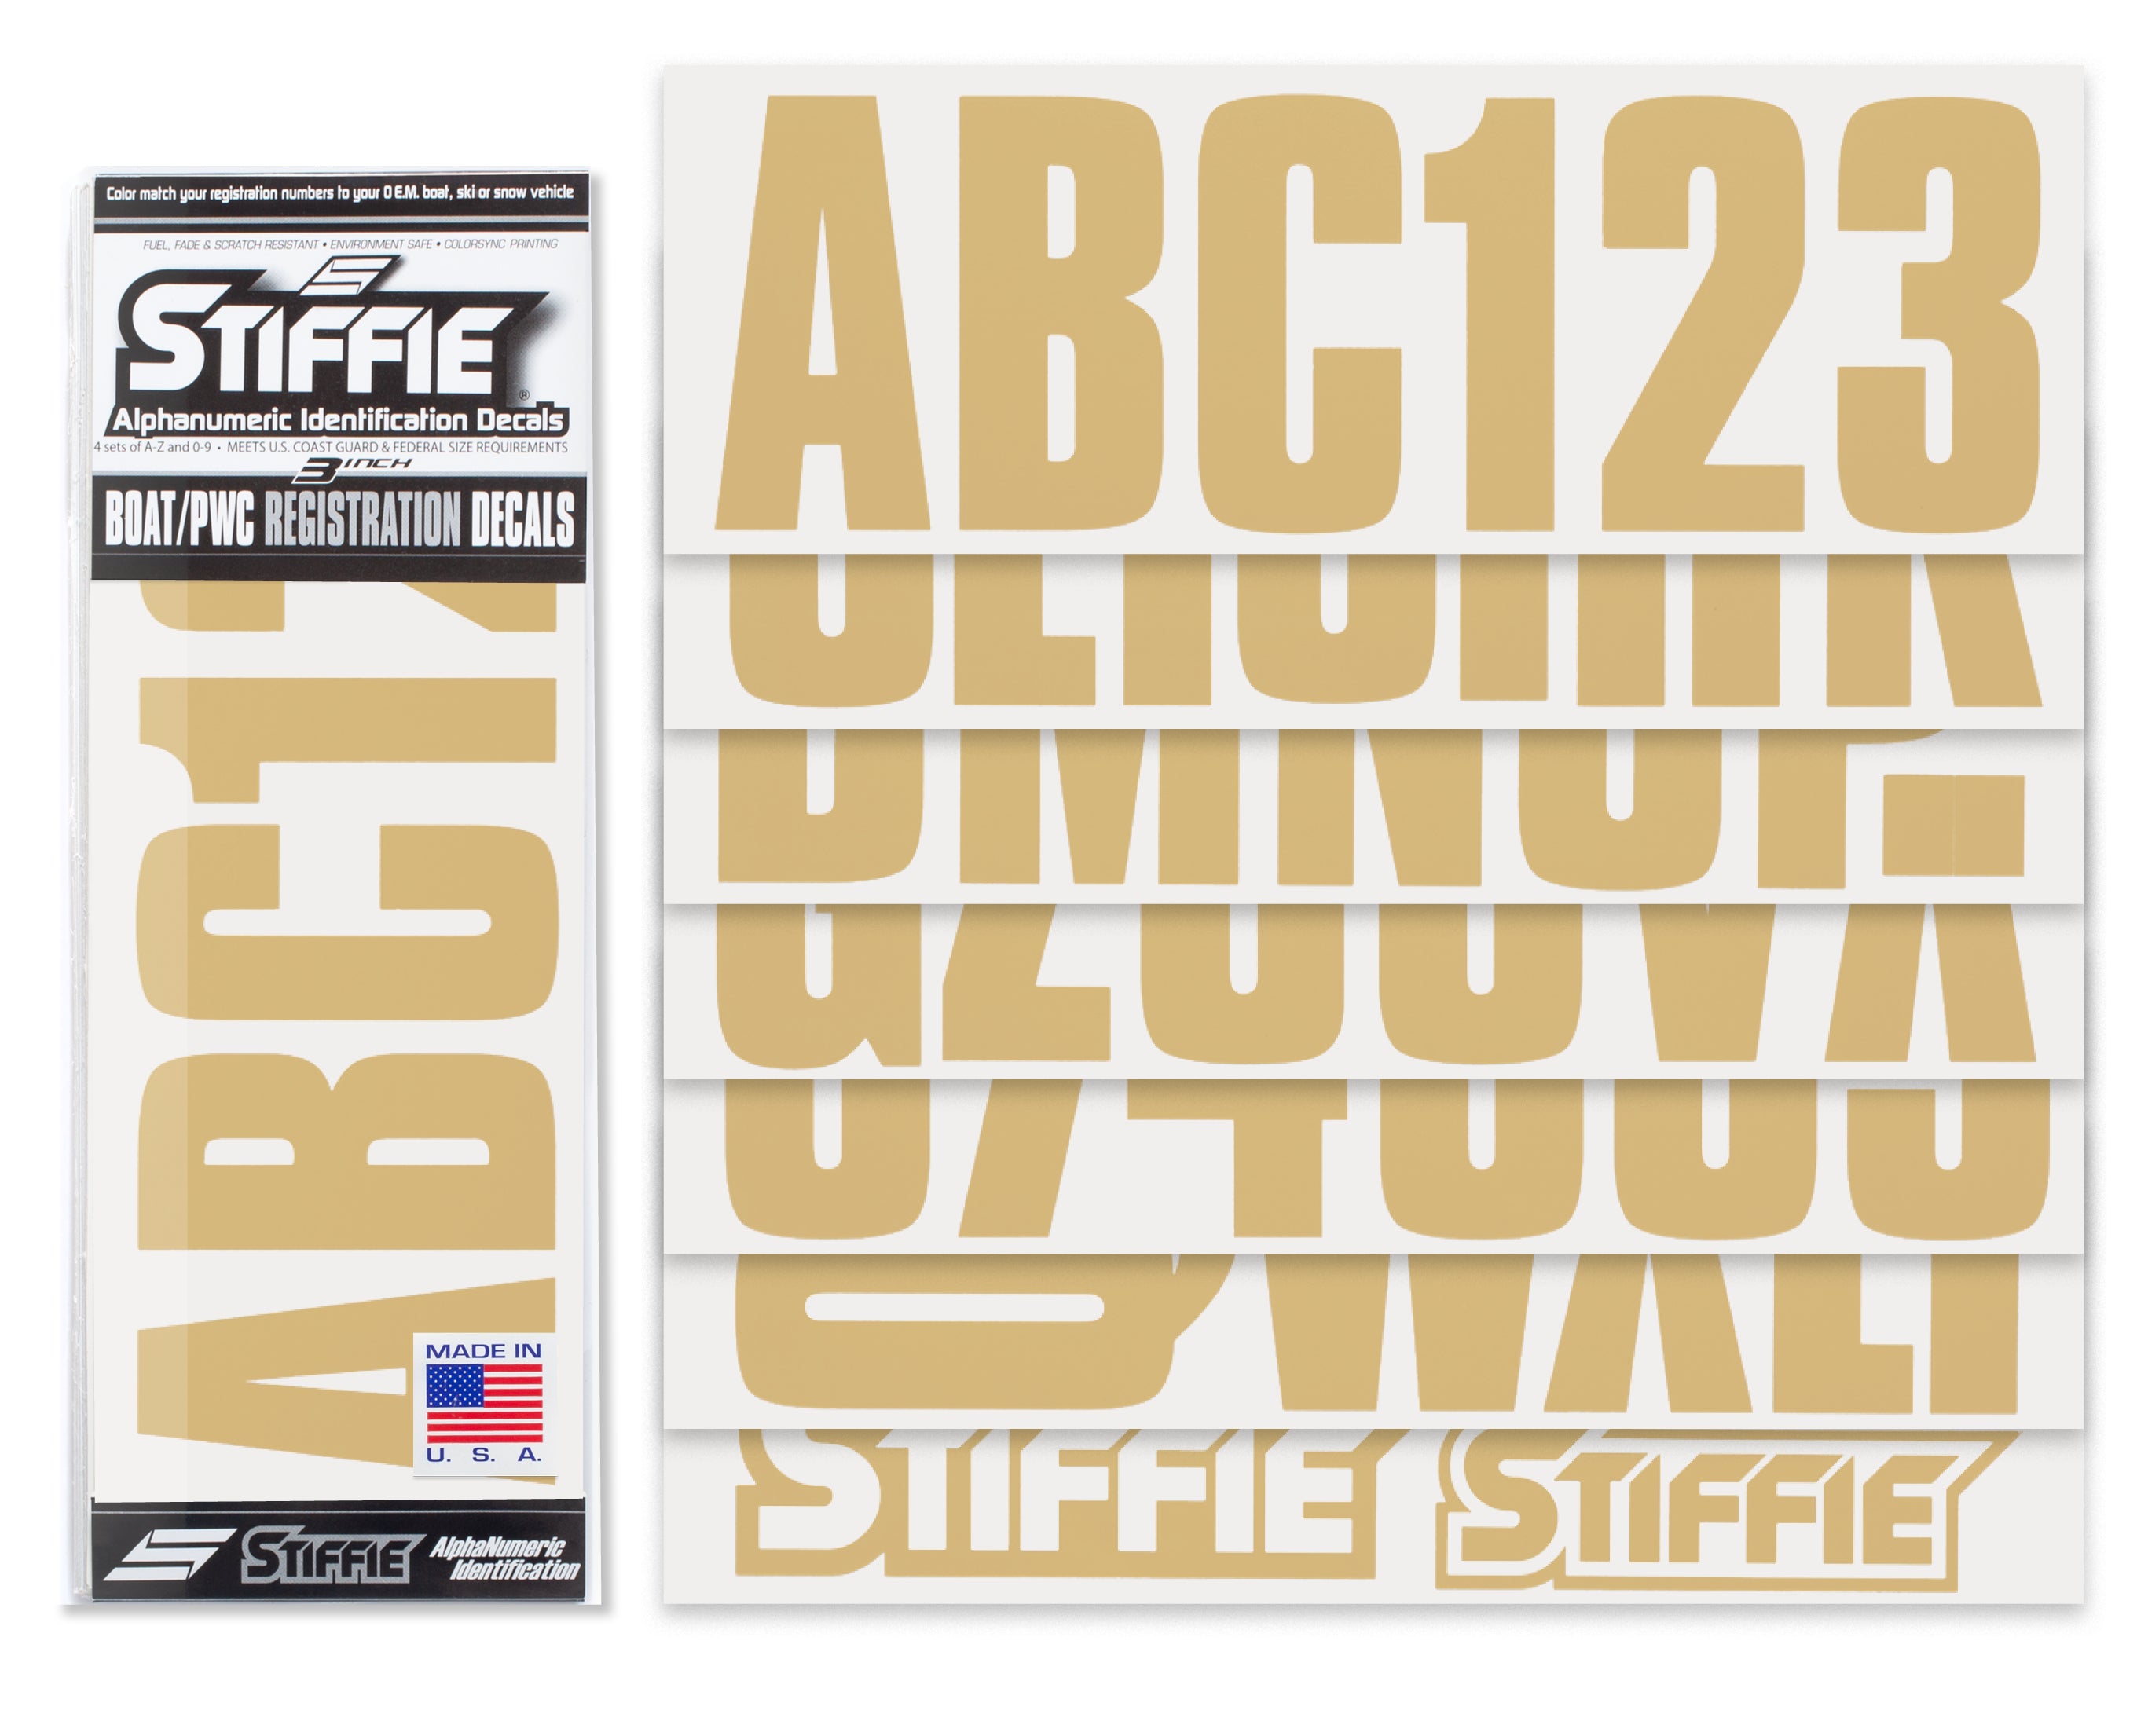 STIFFIE Uniline Tan 3" ID Kit Alpha-Numeric Registration Identification Numbers Stickers Decals for Boats & Personal Watercraft